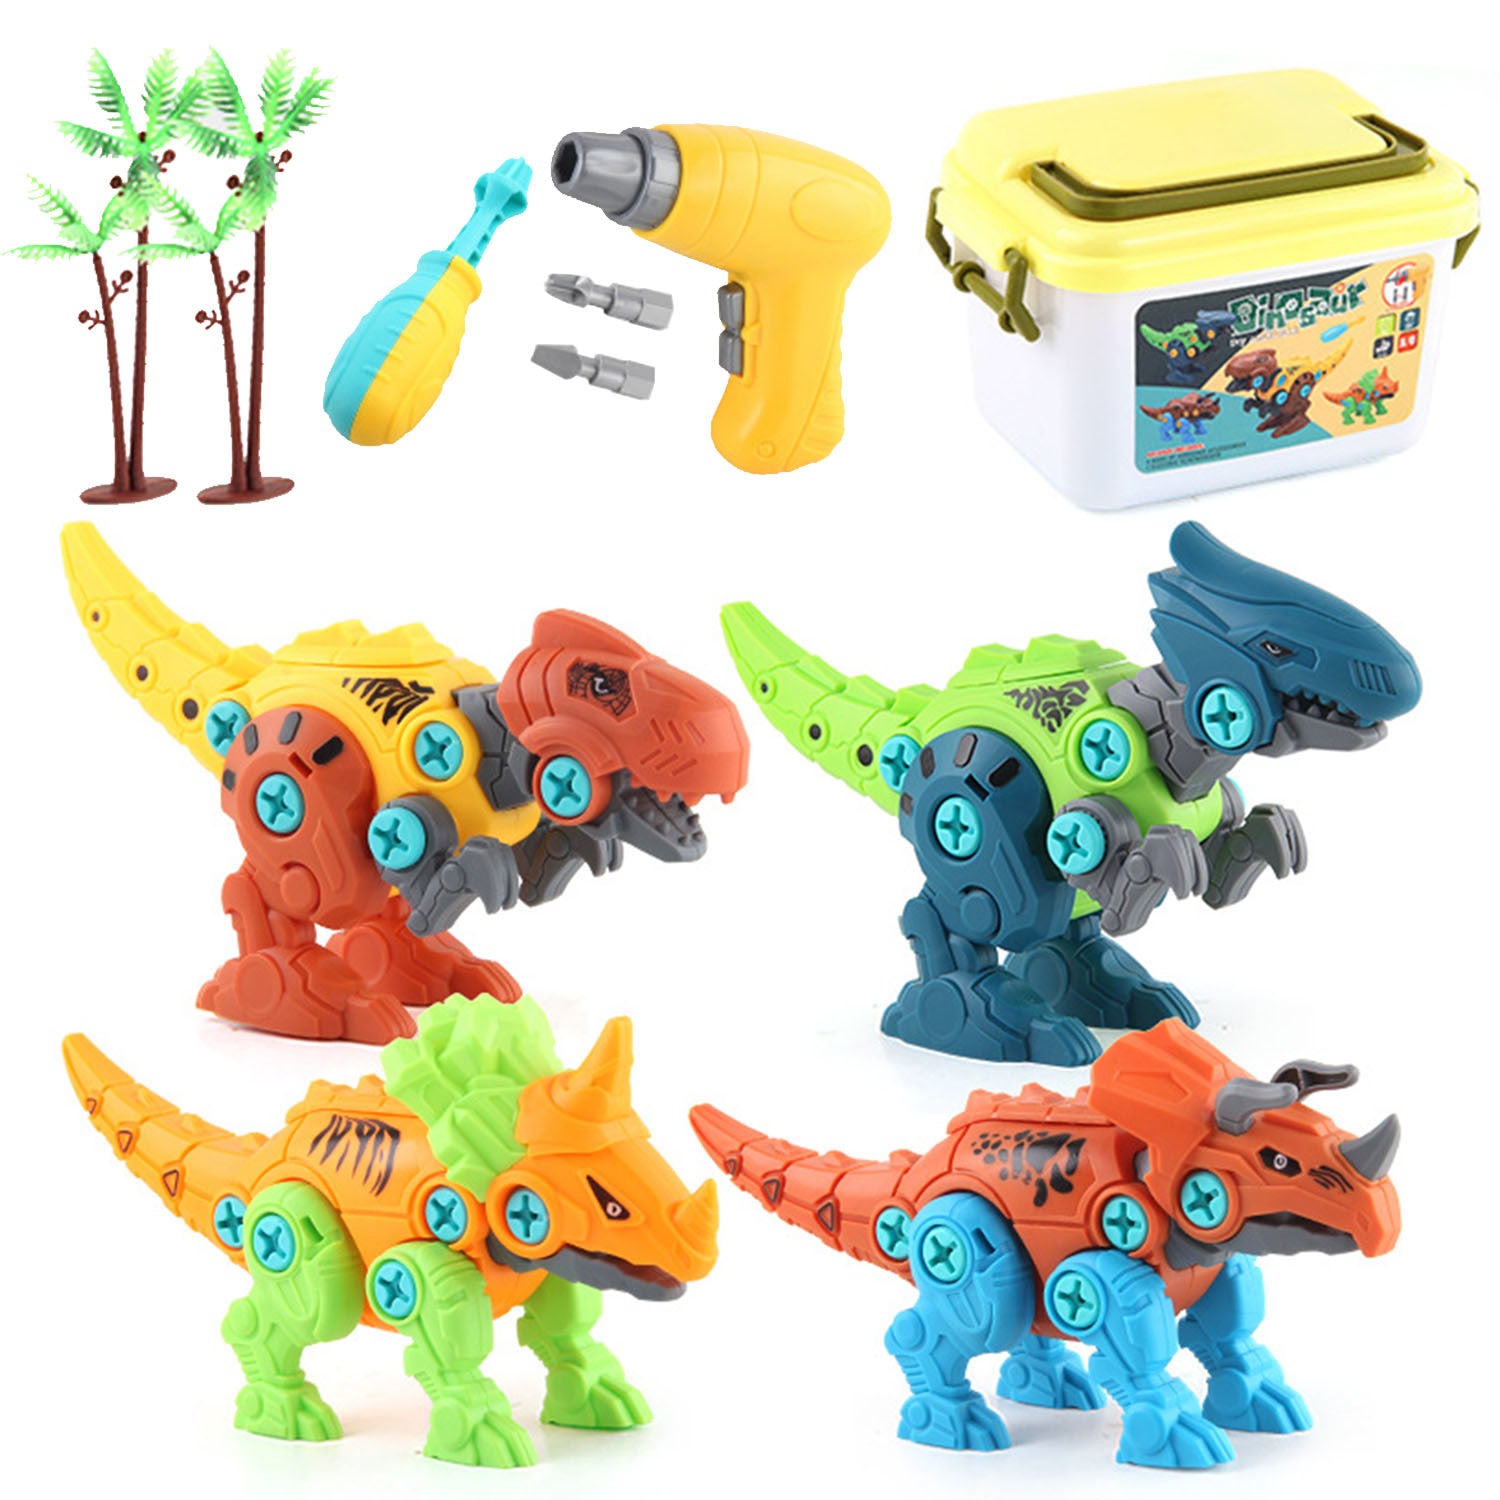 A set of Take Apart Dinosaur Toys DIY Dinosaur Construction Building Block Assembly Toys with Electric Drill for Kids 3 to 7 Year Old with safe materials.